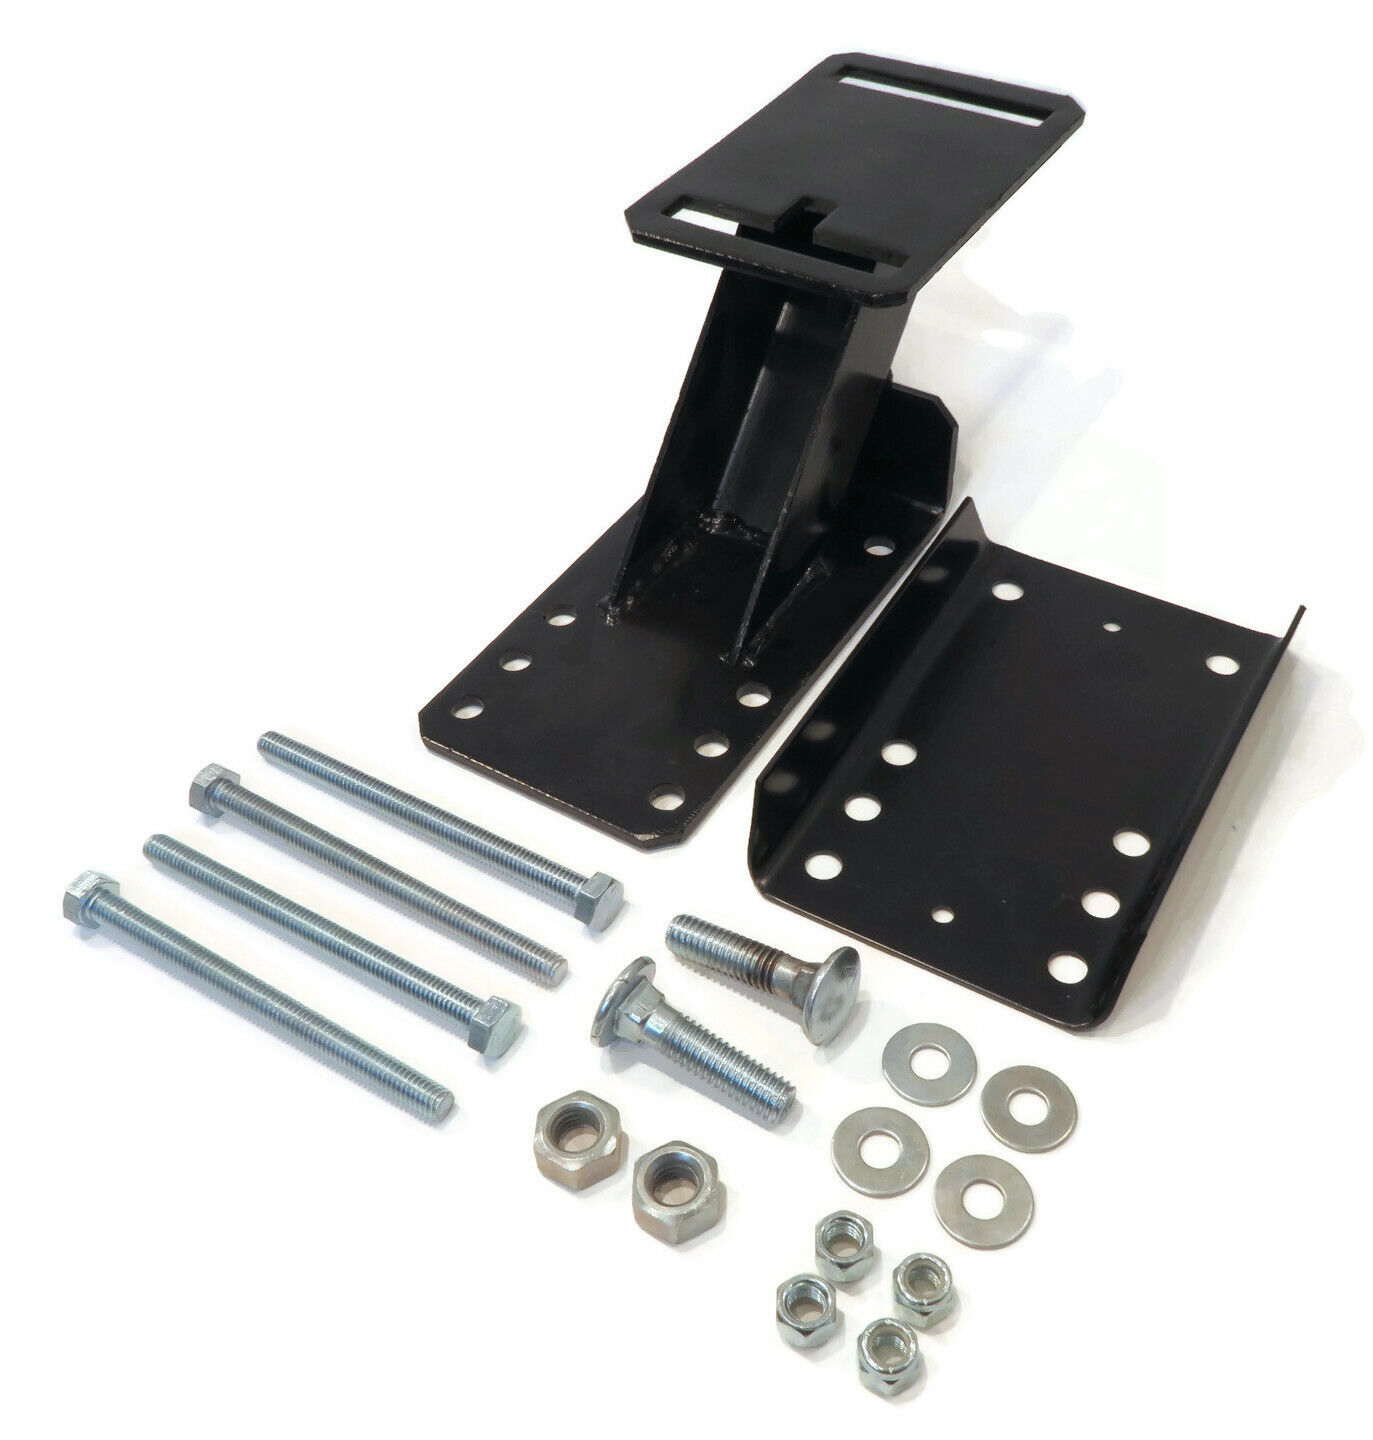 Spare Tire Wheel Mount Kit with Hardware, Angled Bracket for Cargo, Boat, Camper